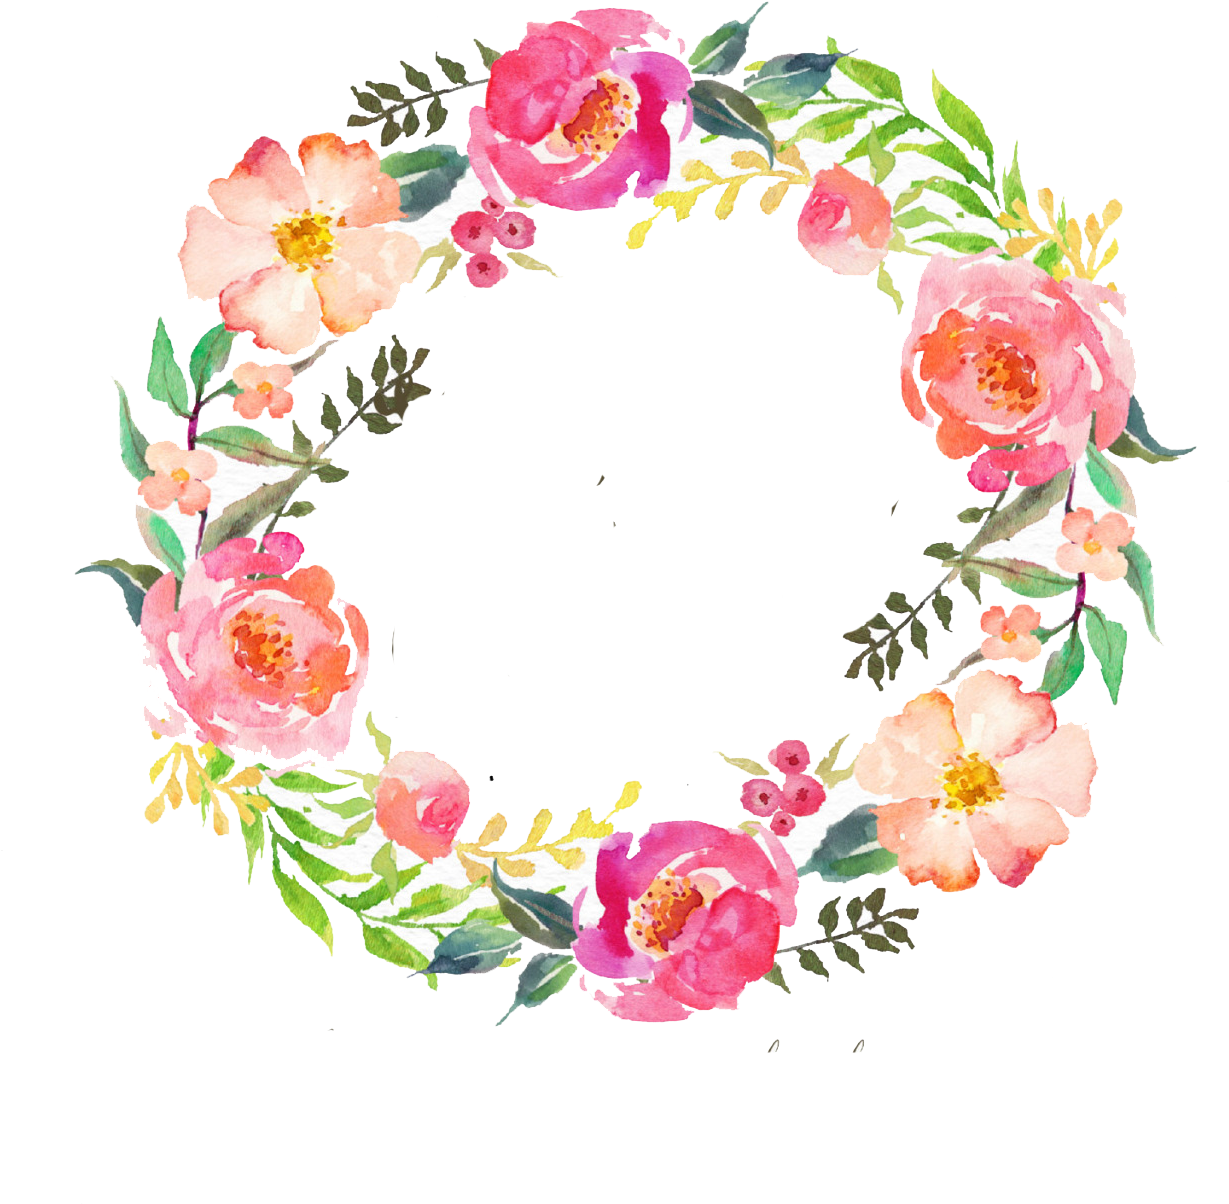 Watercolour Flowers Wreath Watercolor Painting Garland - Water Color Flowers Wreath (1280x1280)